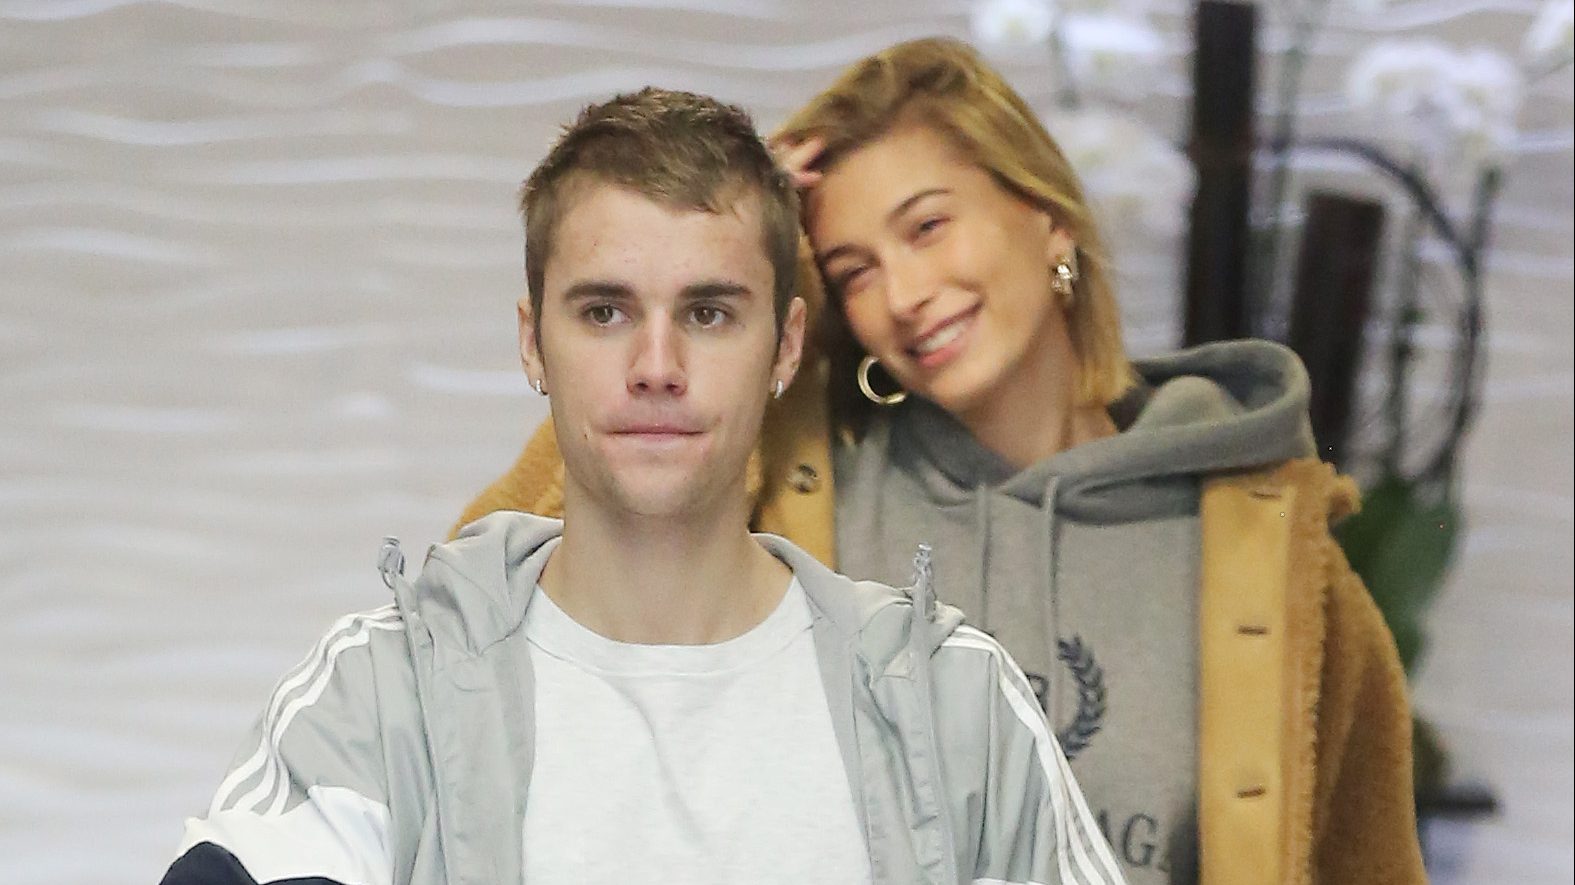 Justin Bieber And Hailey Baldwin Hang Out In West Hollywood